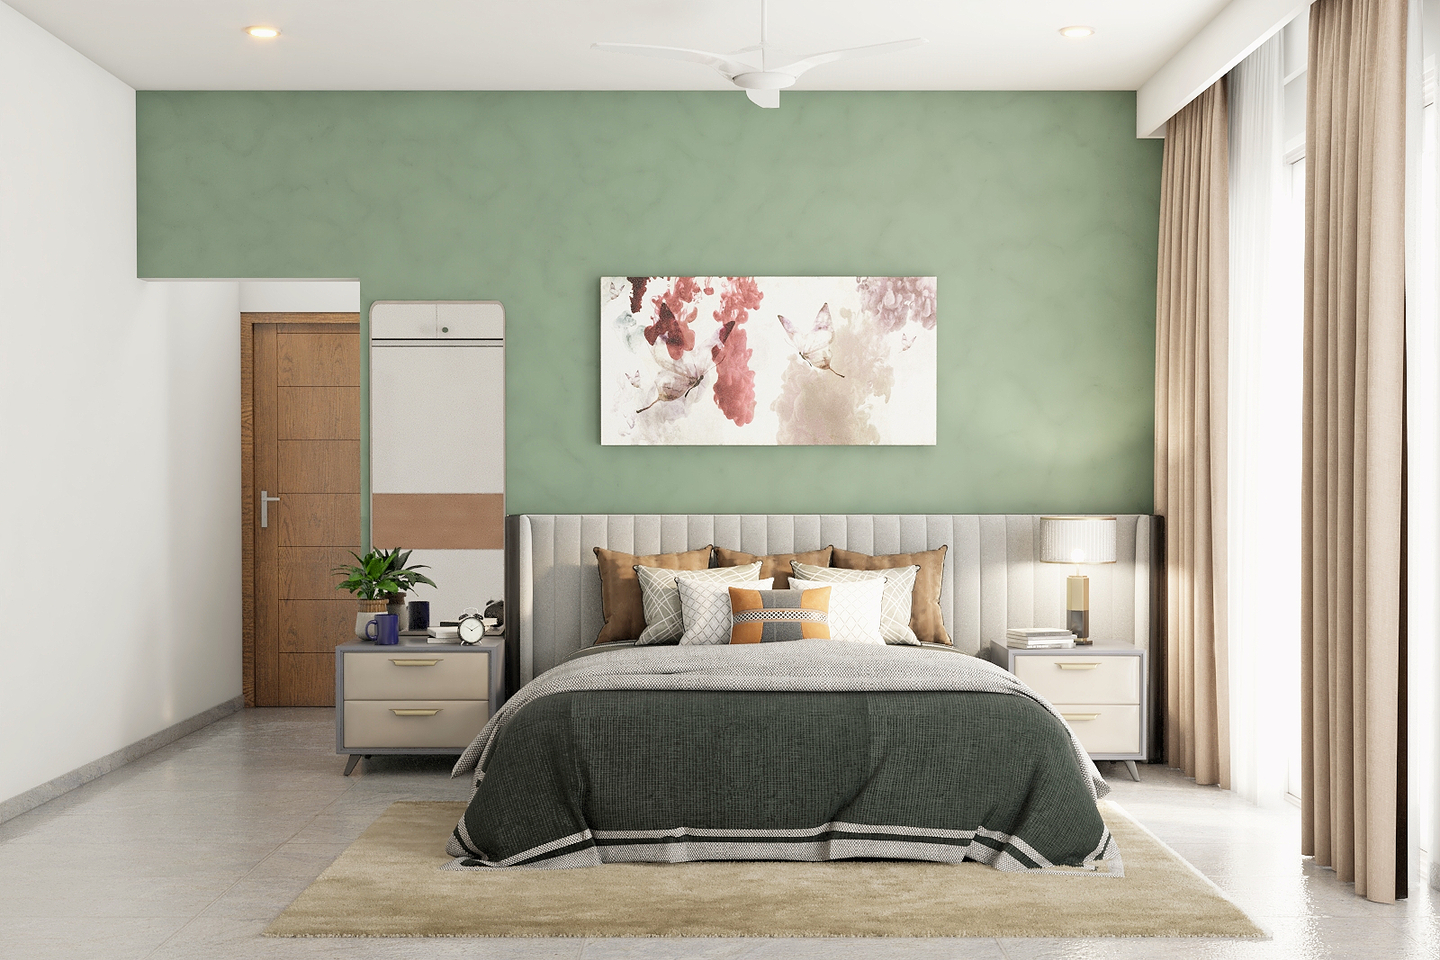 Master Bedroom With Green Paint - Livspace